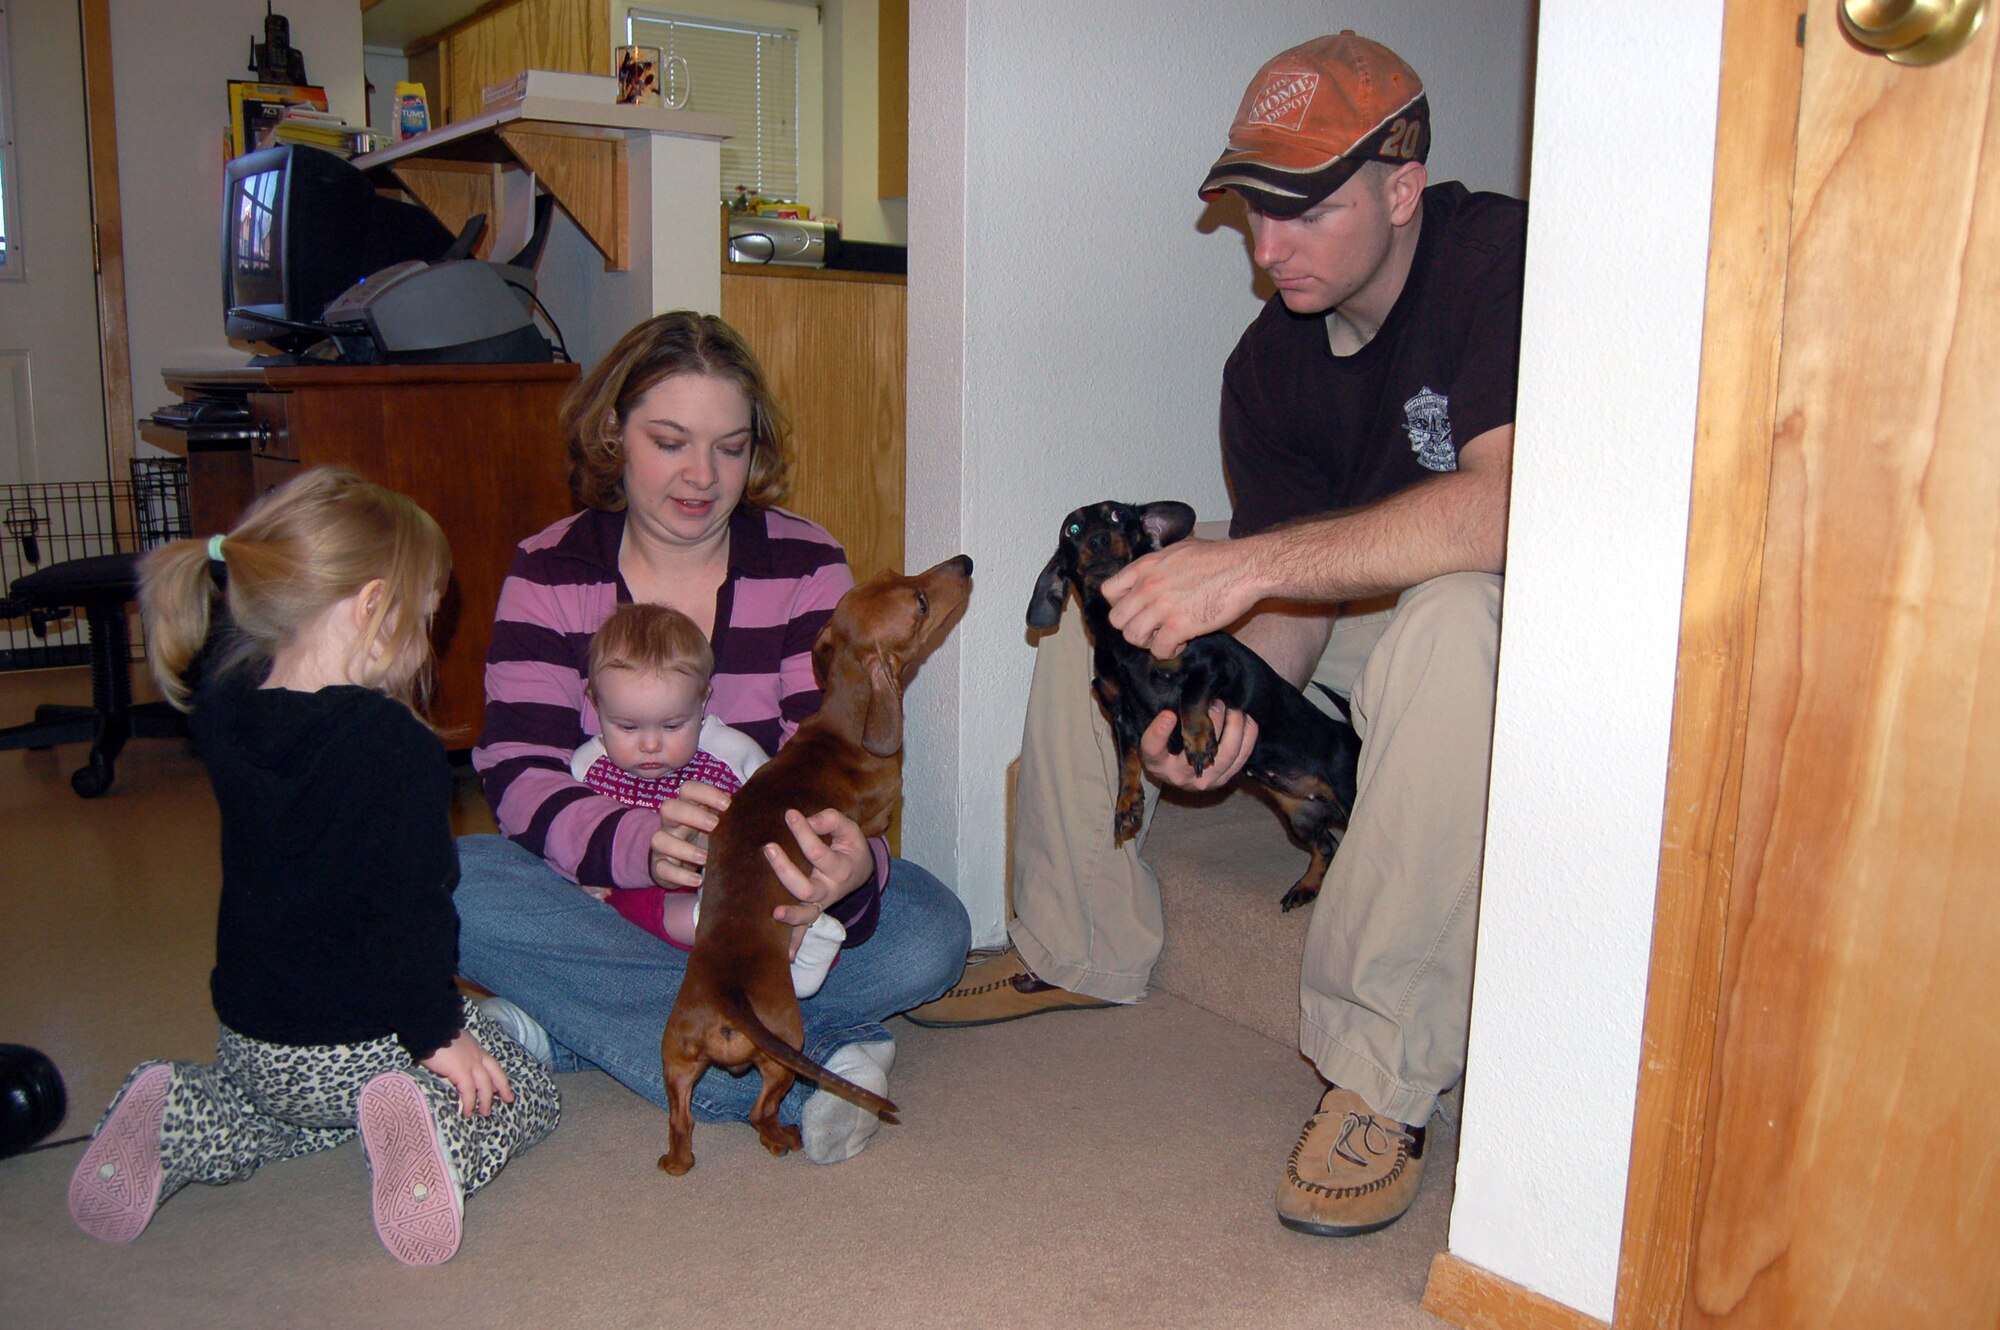 Staff Sgt. Philip Bridges, his wife, Jamie (center), Liberty (left), and 8-month-old Lily, play with their dogs in their new home in base housing Feb. 27 at Eielson Air Force Base, Alaska. They were one of 300 families living in the Sprucewood Homes section of the base's privatized housing. The Bridges and other Air Force families had to be moved out of the privatized housing into new housing from September to December. The reason for the move was due to a conclusion of a privatized housing contract that wasn't able to be renegotiated. (U.S. Air Force photo/Staff Sgt. Matthew Rosine)